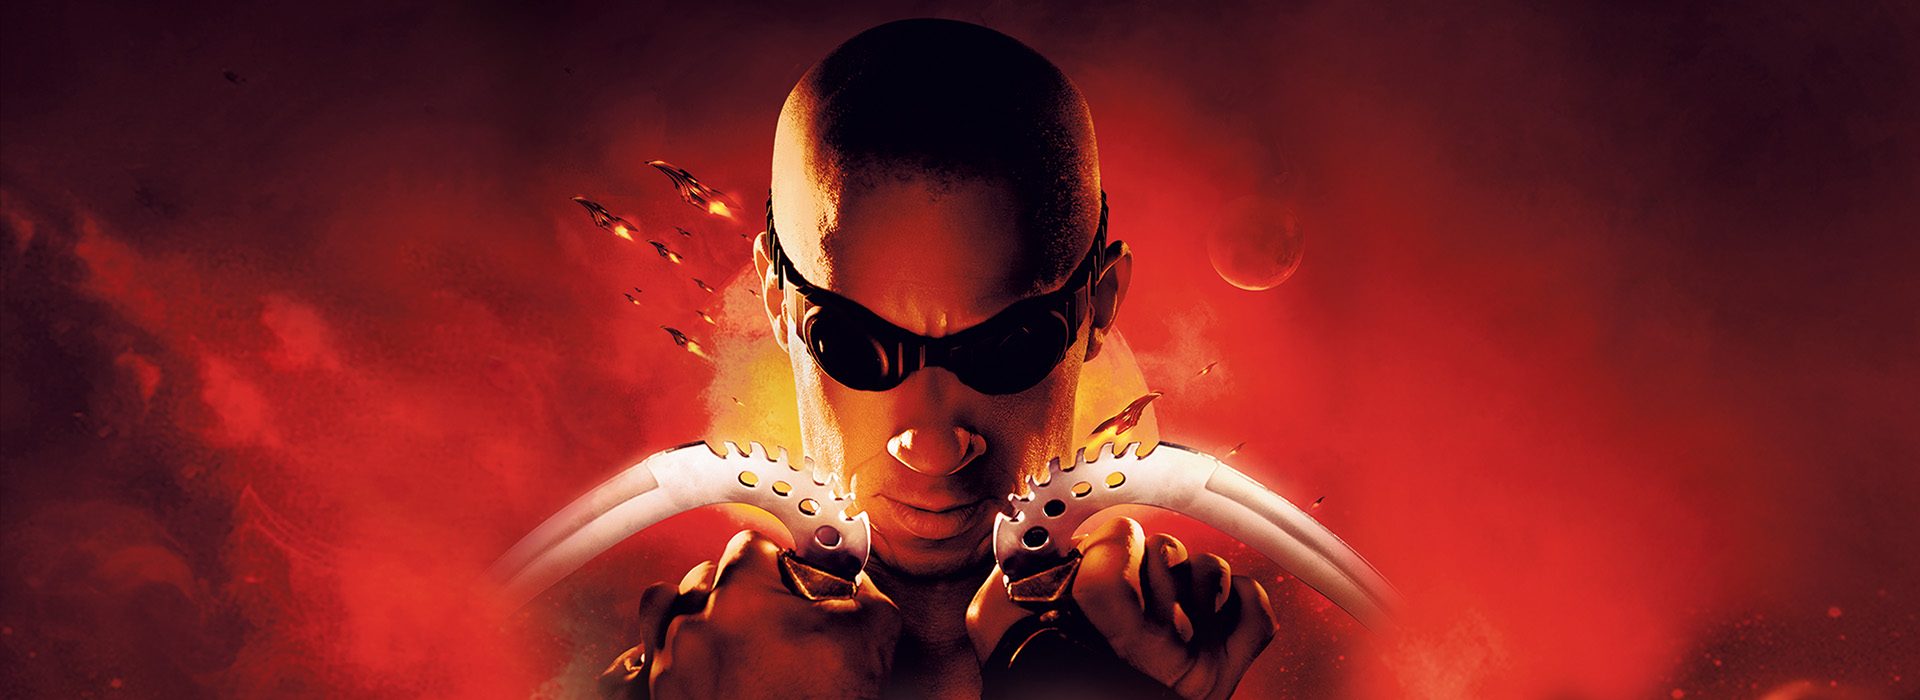 Movie poster The Chronicles of Riddick